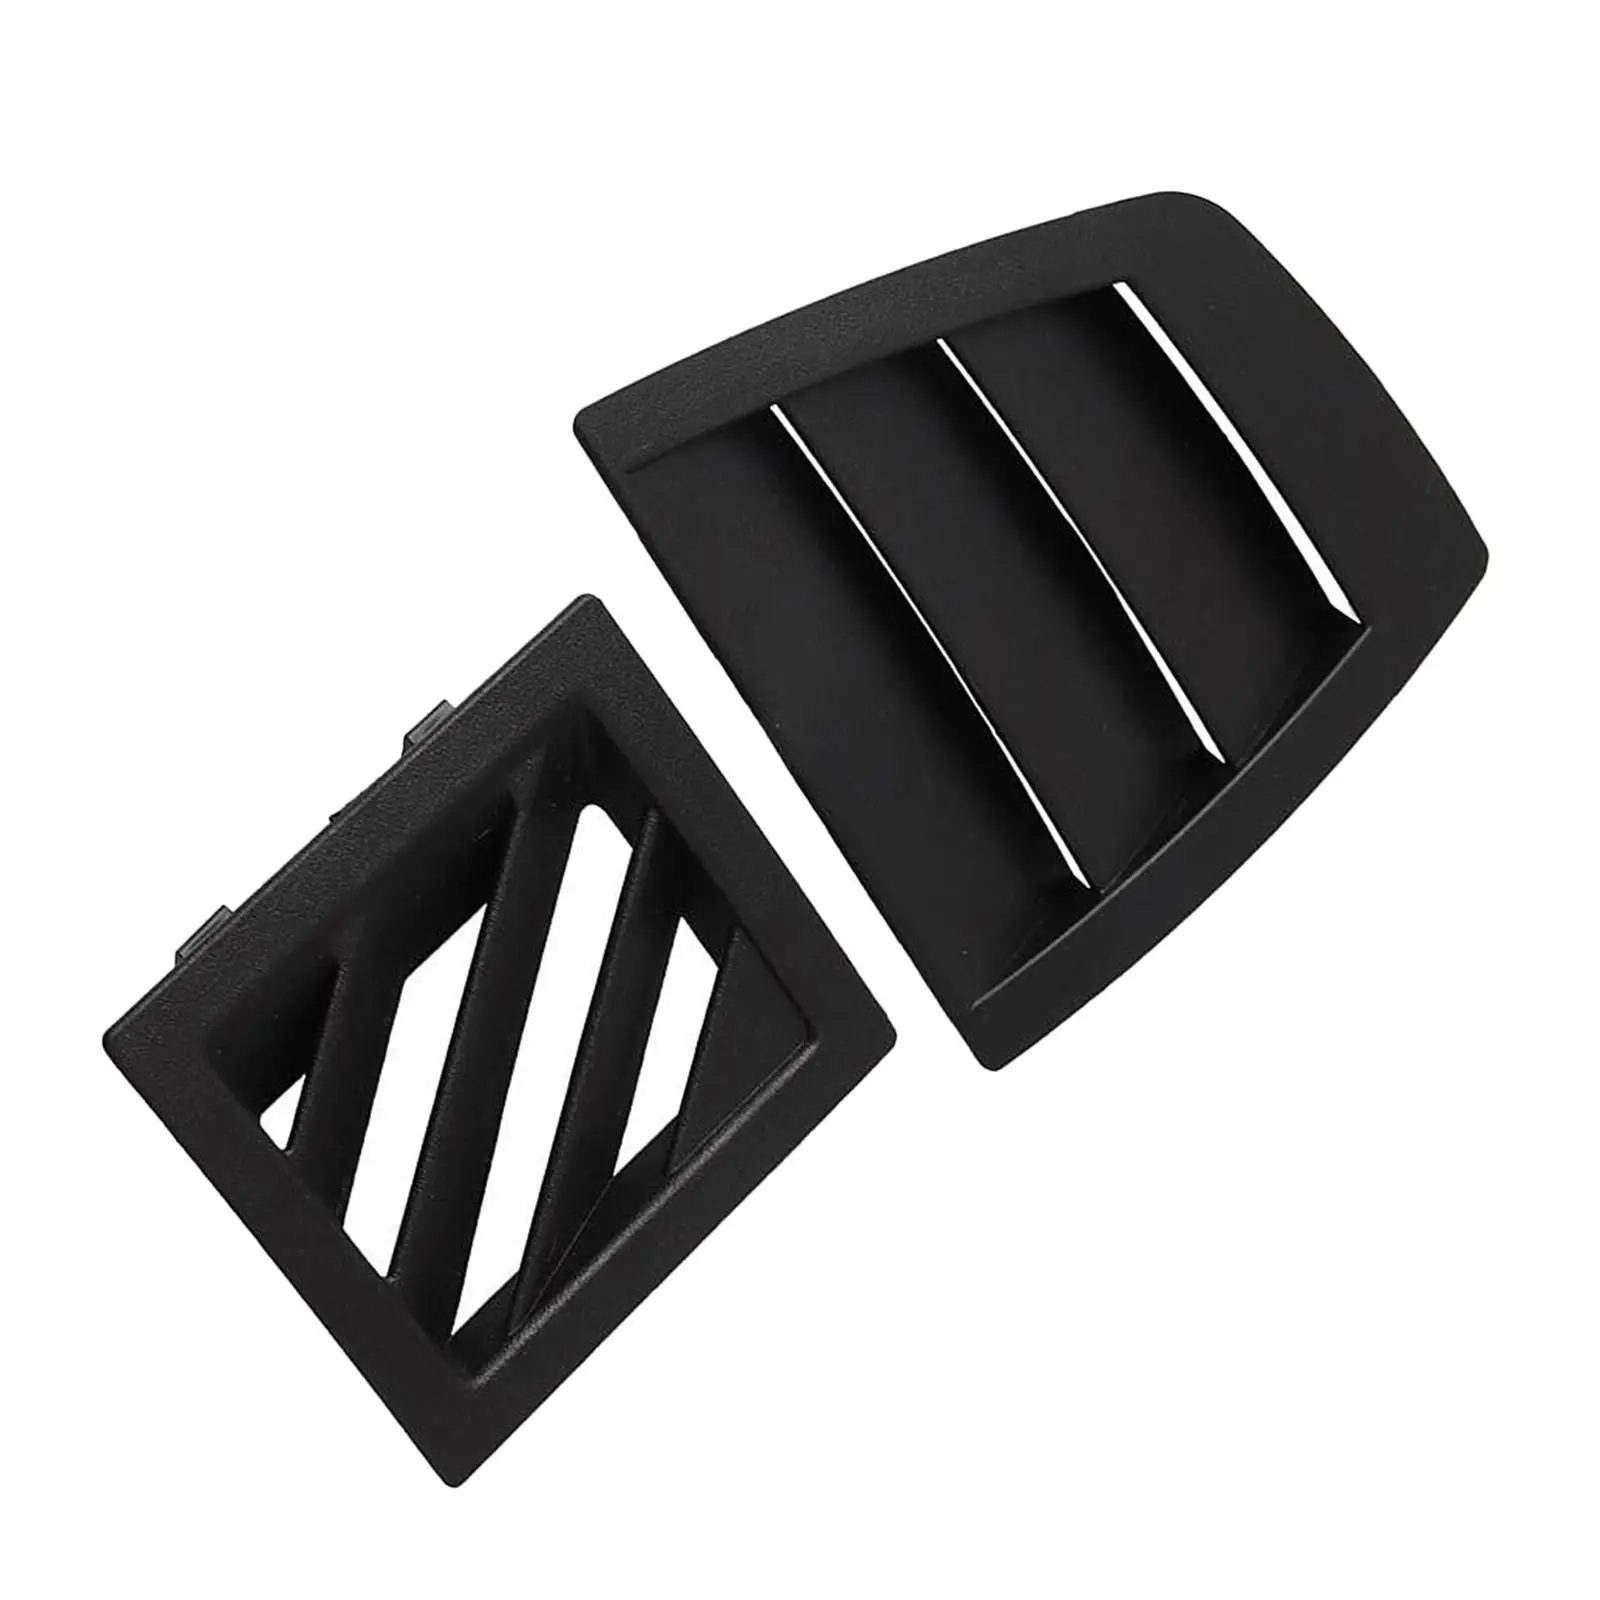 Vehicle Dash Air Vent Grille Cover Set Replaces Left&Right For 